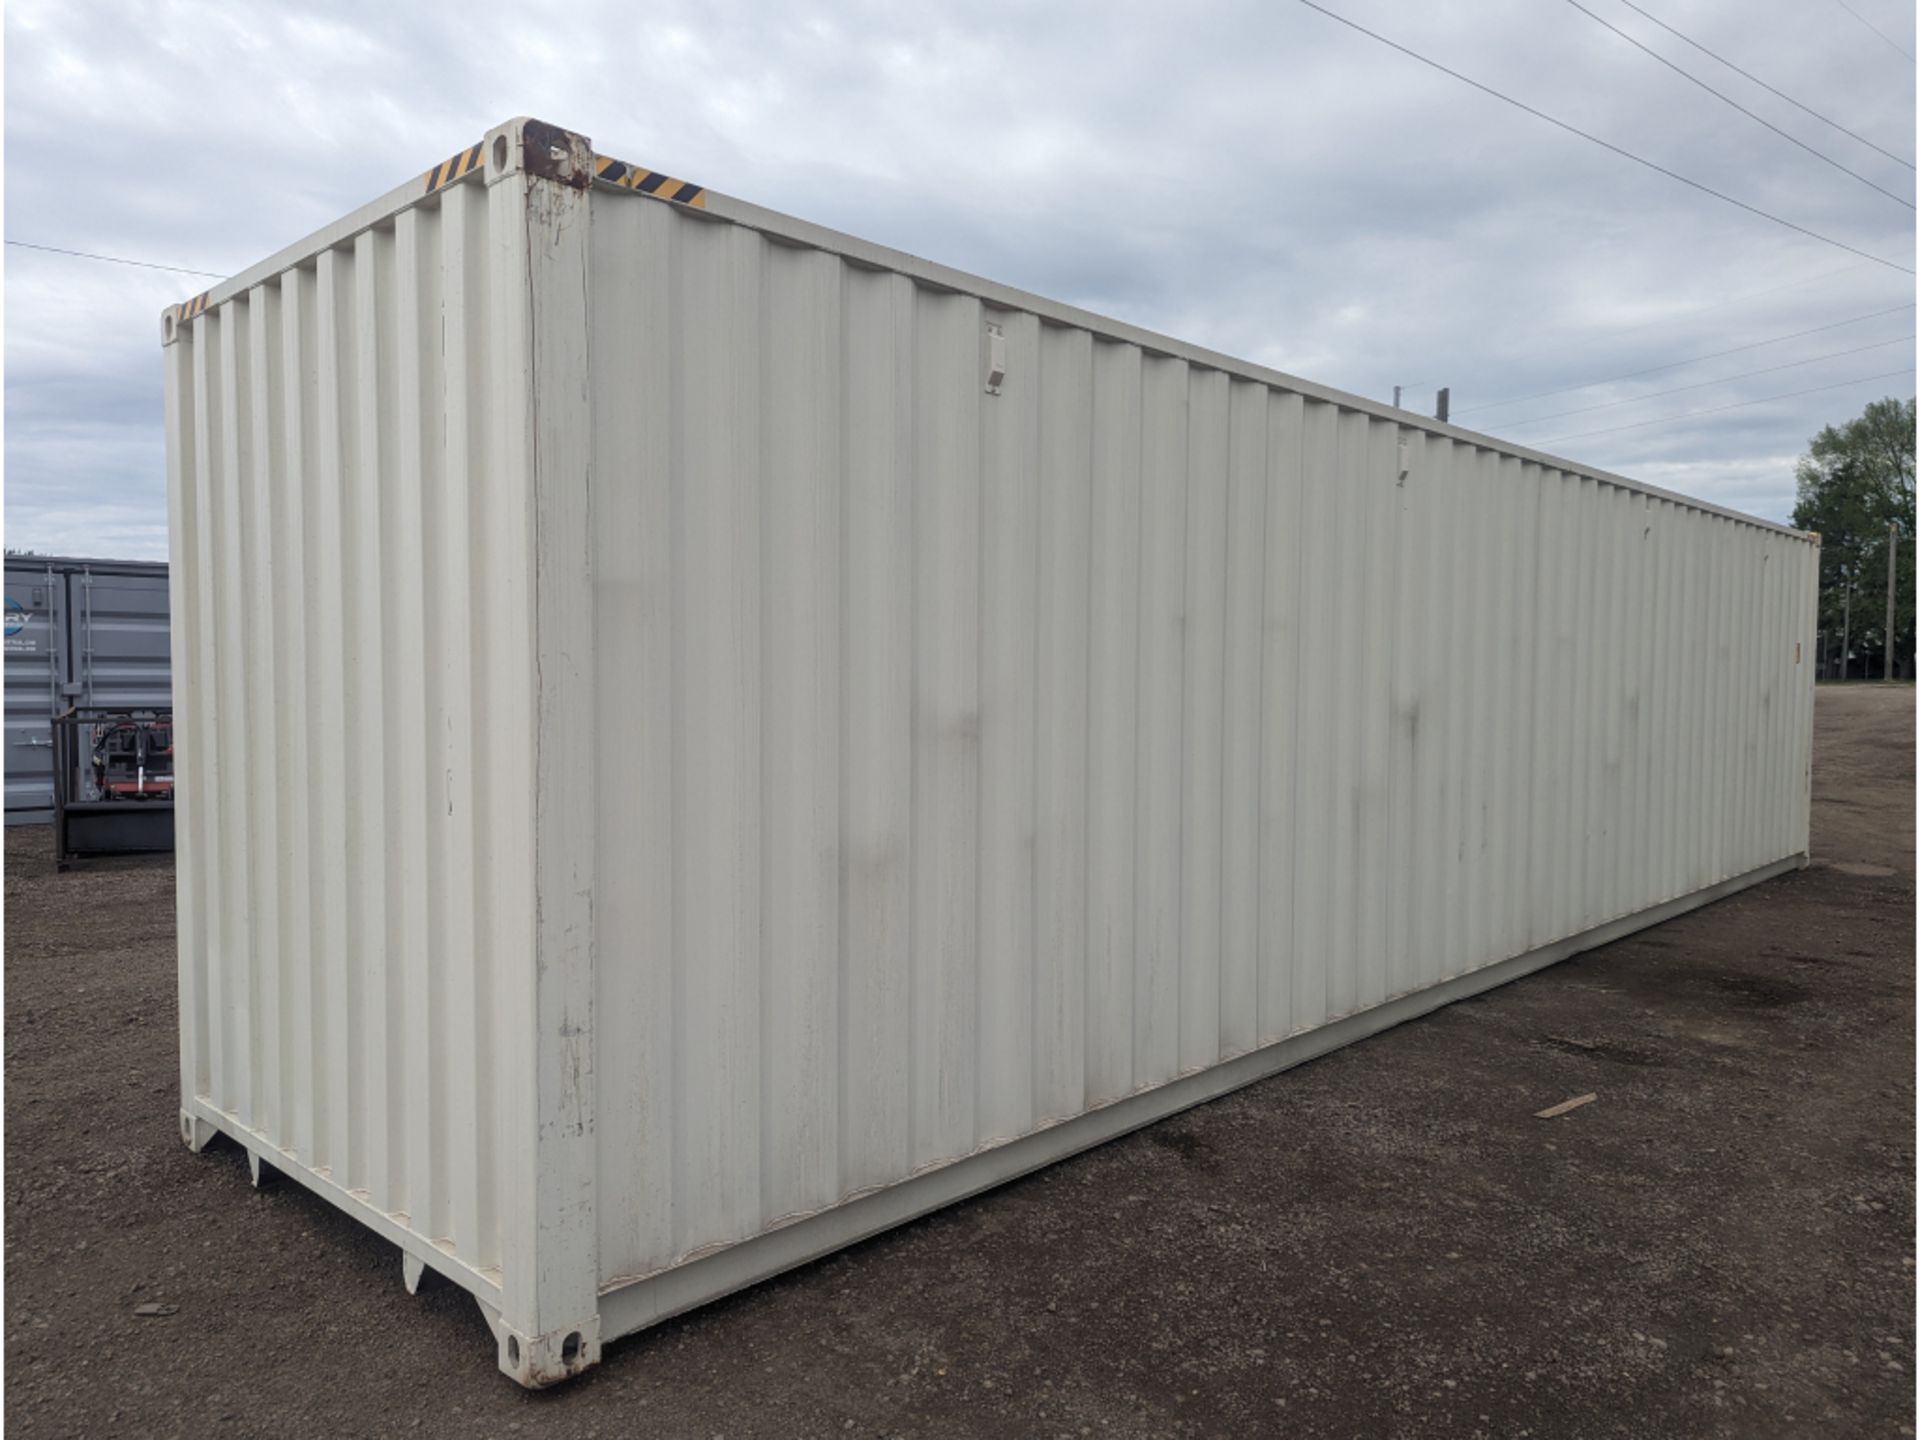 1 Trip 40' High Side Shipping Container w/ 4 Side Doors - Image 6 of 6